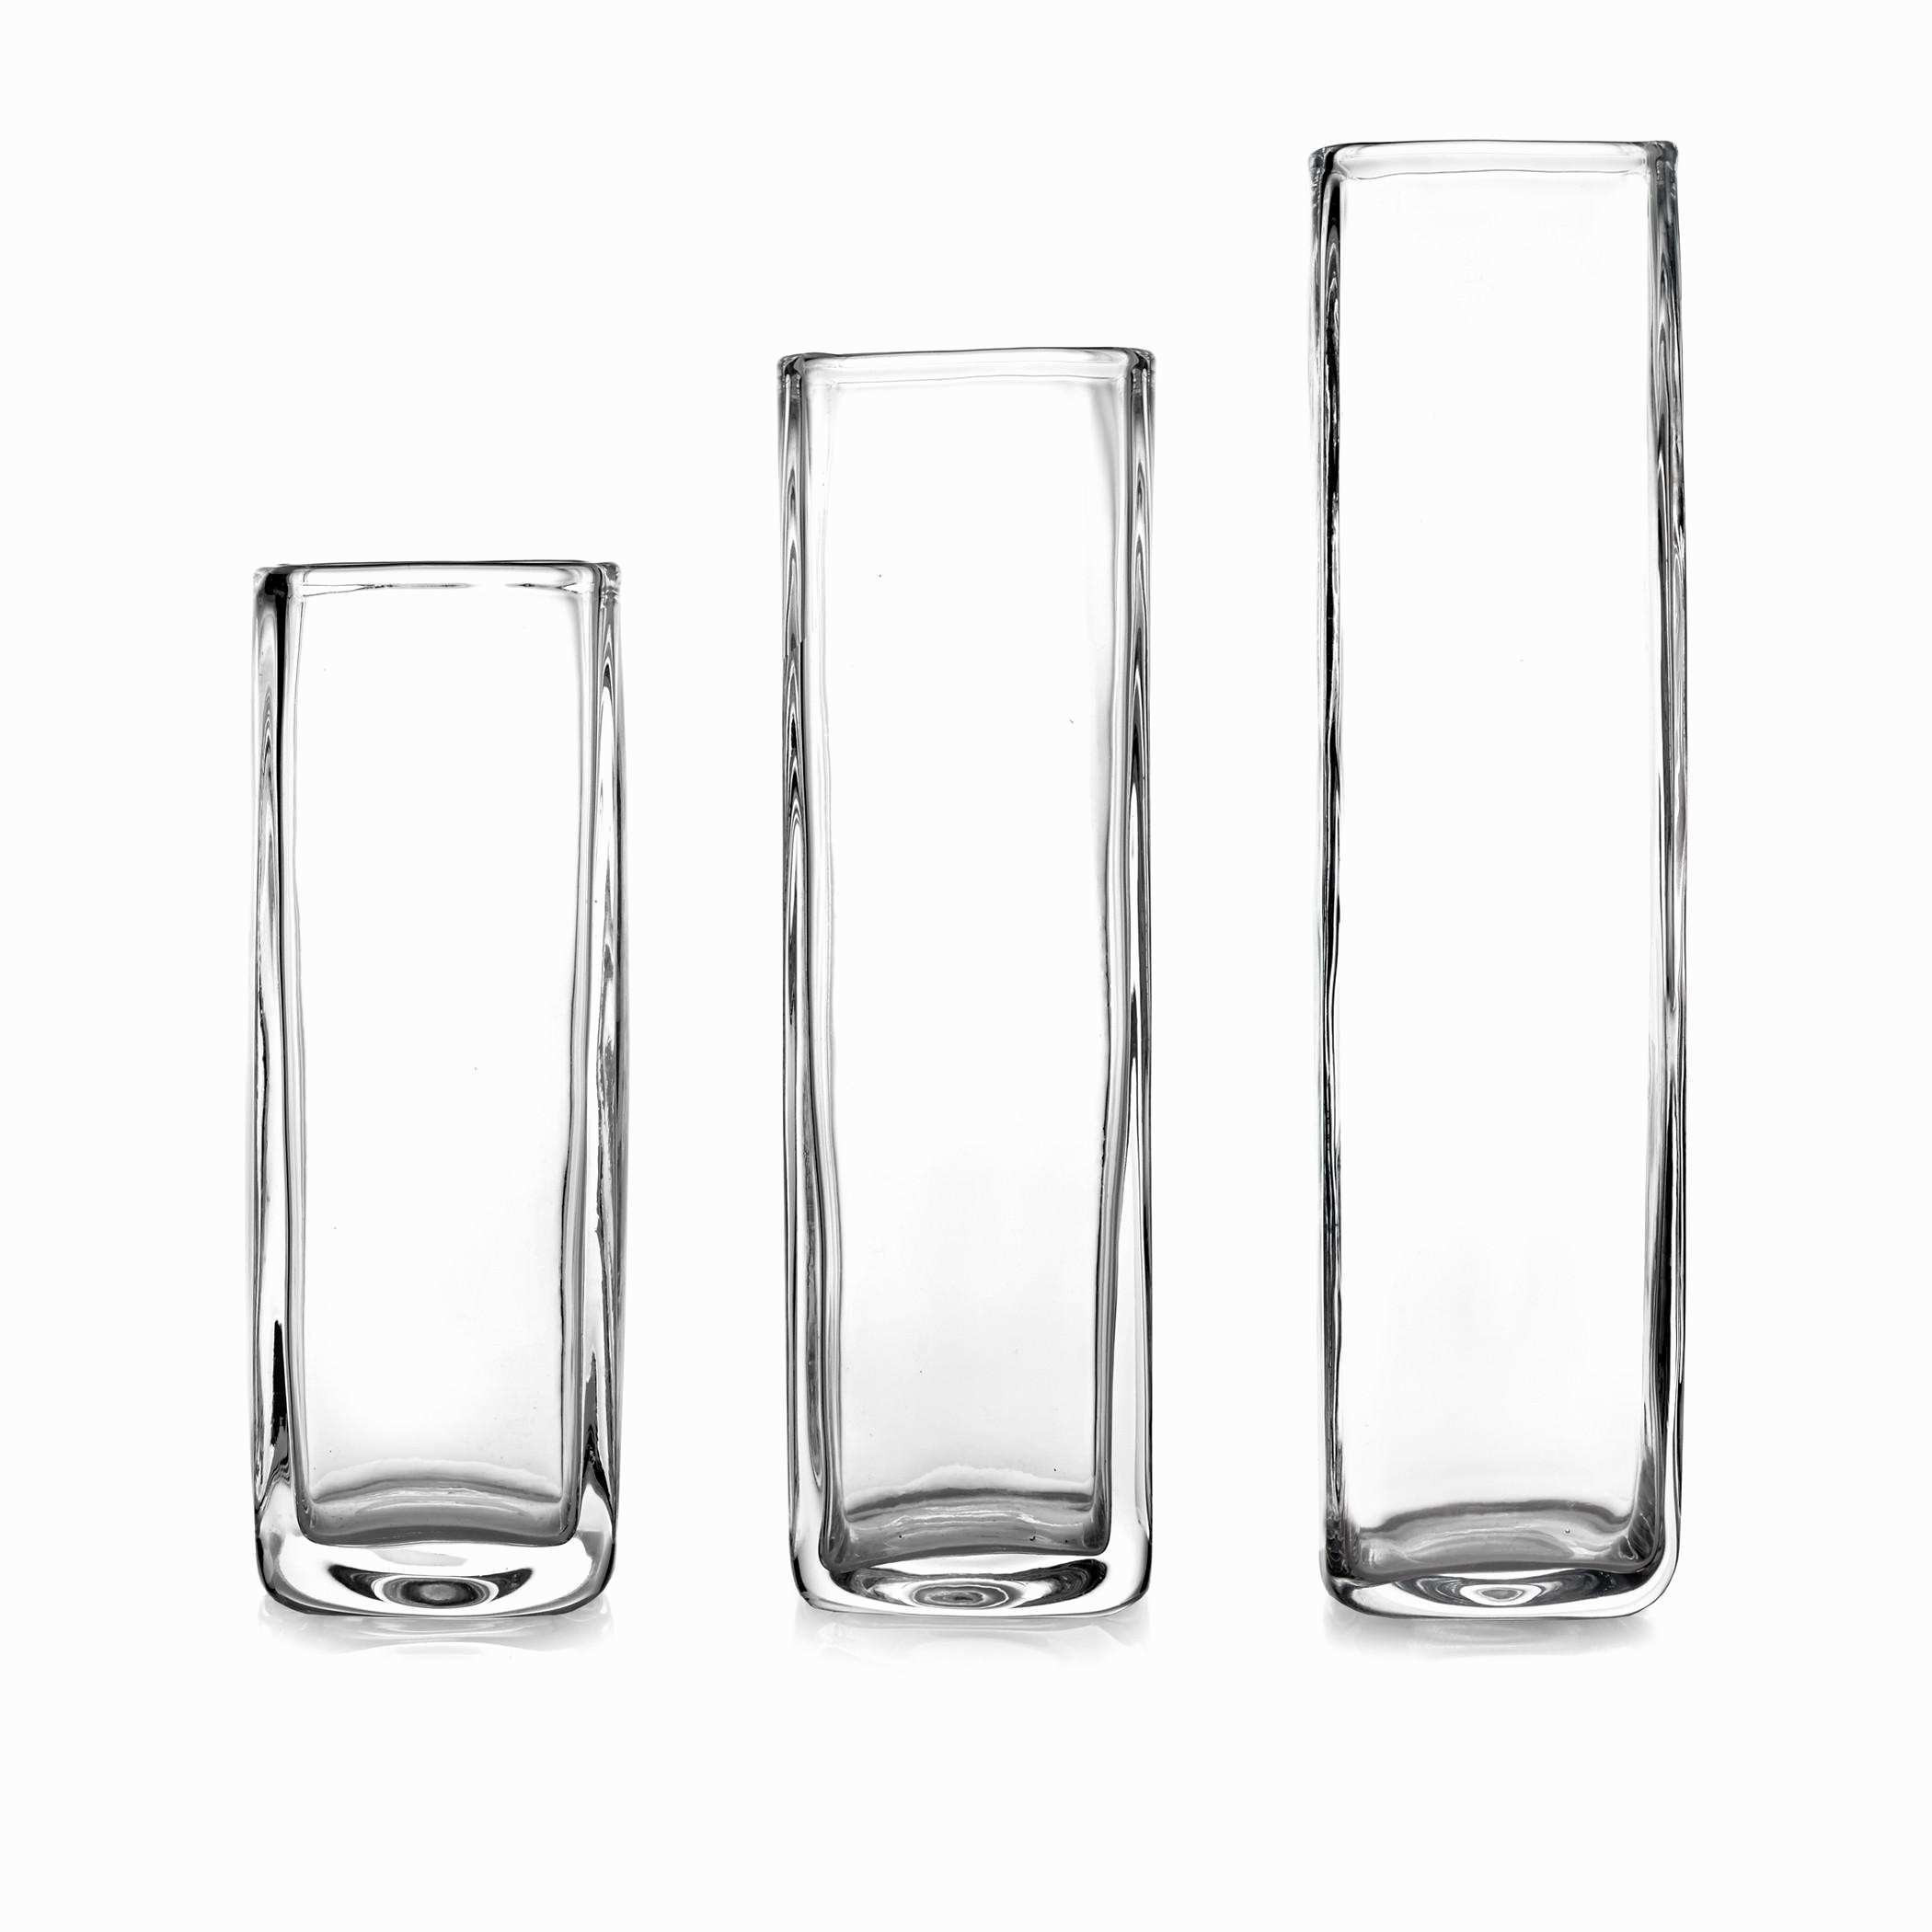 27 Lovable Cheap Glass Vases Near Me 2024 free download cheap glass vases near me of black glass vases photos living room vase glass lovely cheap glass intended for black glass vases images glass wedding centerpieces inspirational living room tal